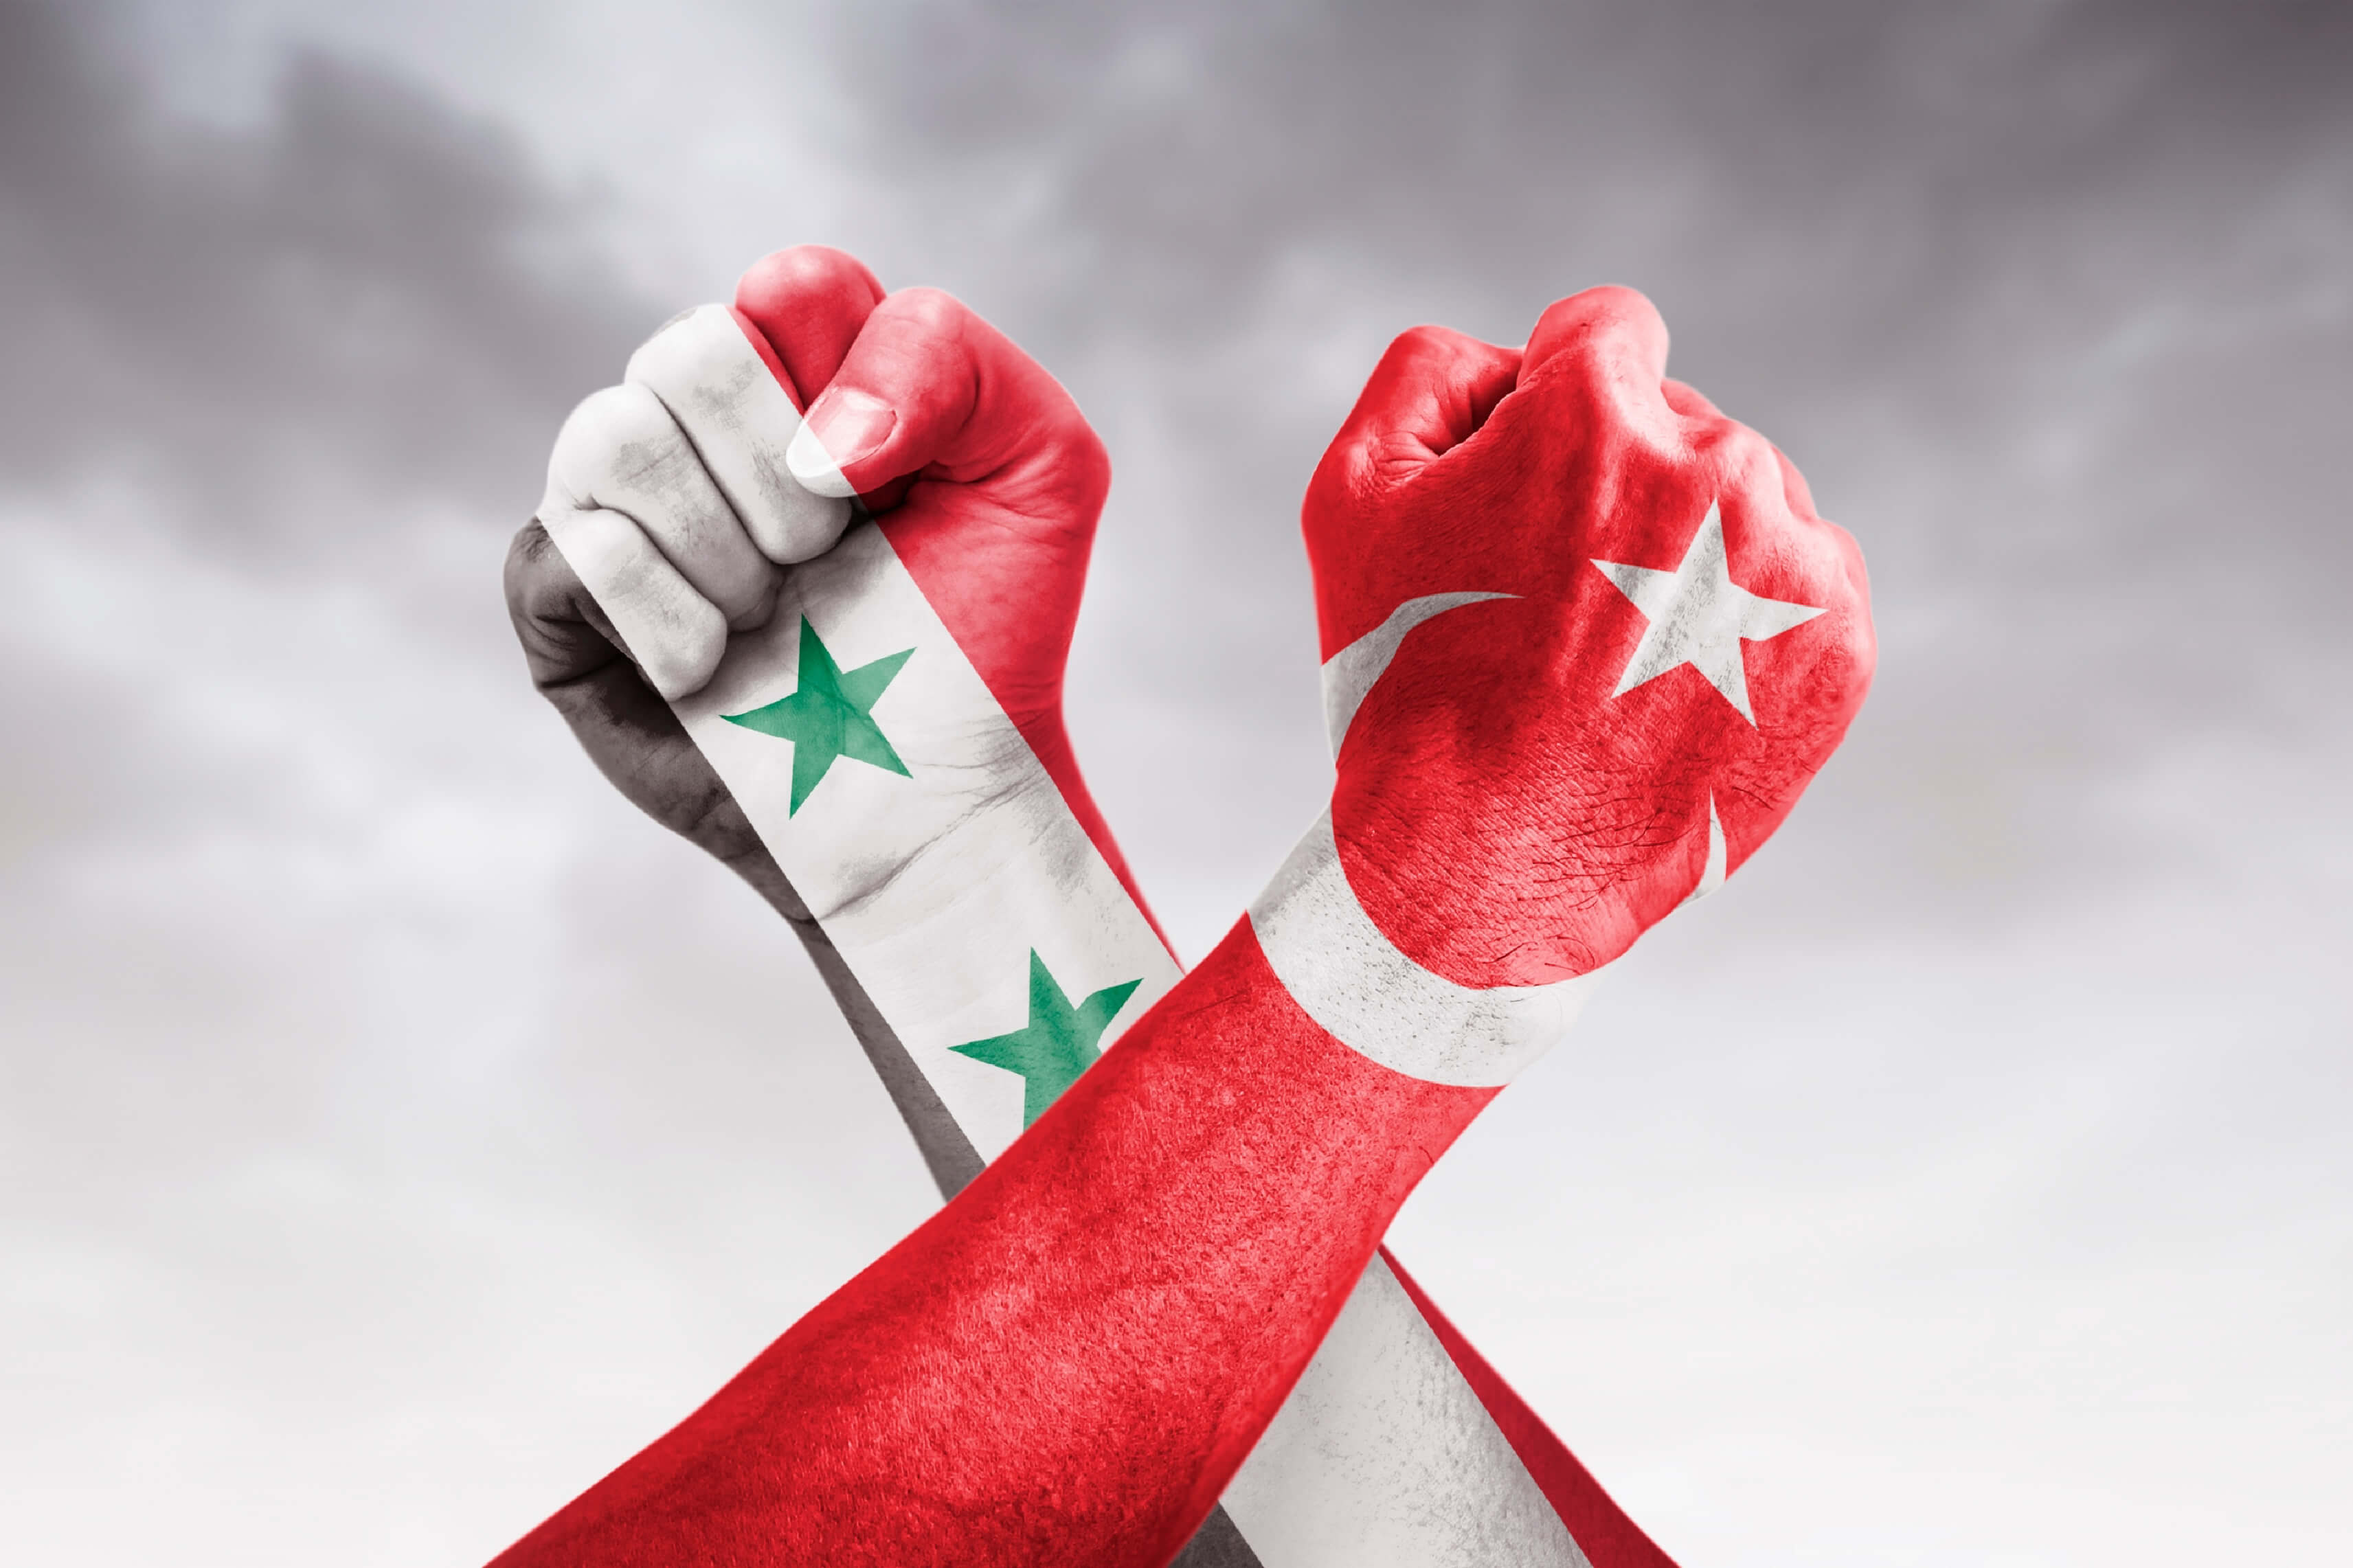 Flags of Turkey and Syria painted on two clenched cross-fists on black background / tense relationship between Turkey and Syria concept